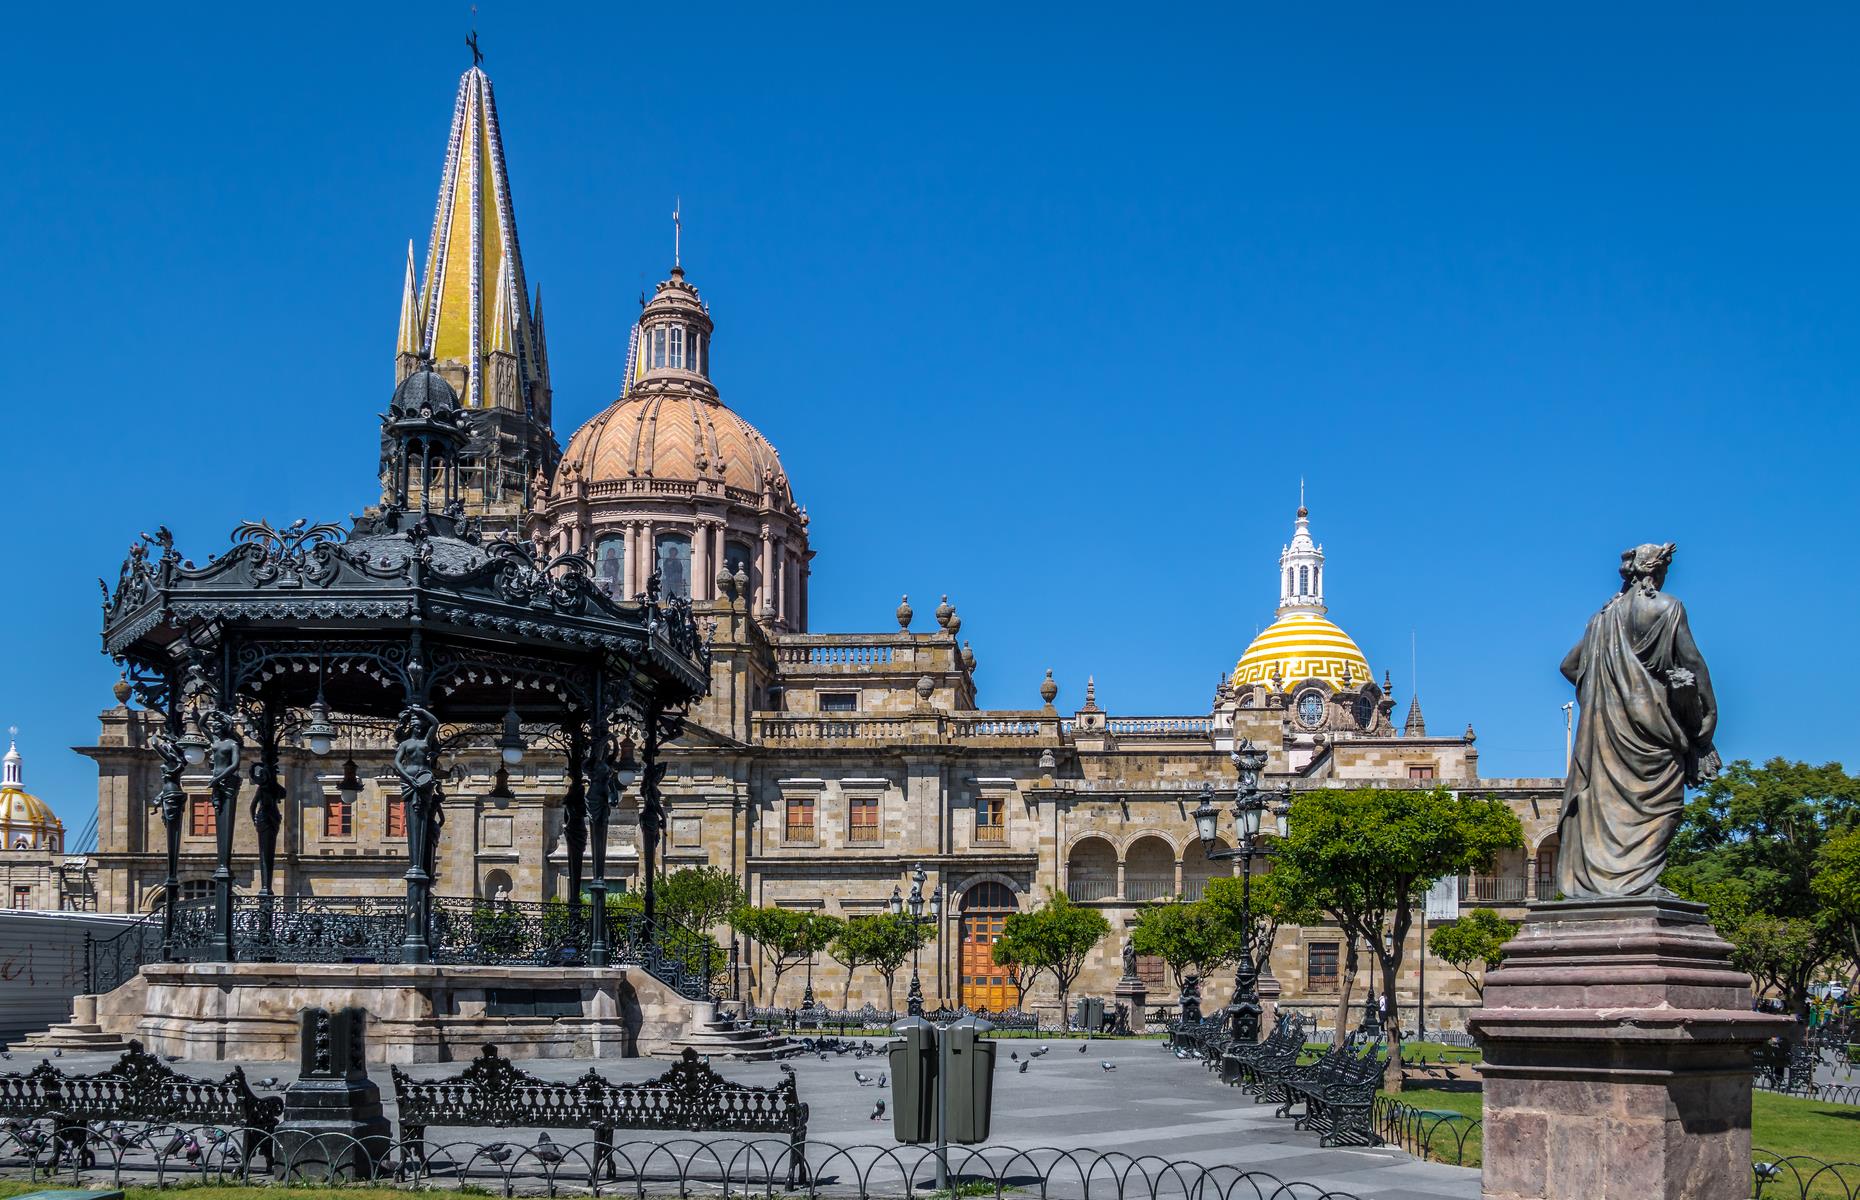 Guadalajara is Mexico’s second largest city and where some of the nation’s longest-standing, most famous traditions were born. Expect to find wide-brimmed sombreros, folk dancing and mariachi music bands. There’s also some stunning historic architecture, such as the cathedral (pictured). Head to the fashionable Chapultepec neighborhood for modern shopping, restaurants and a burgeoning art scene.